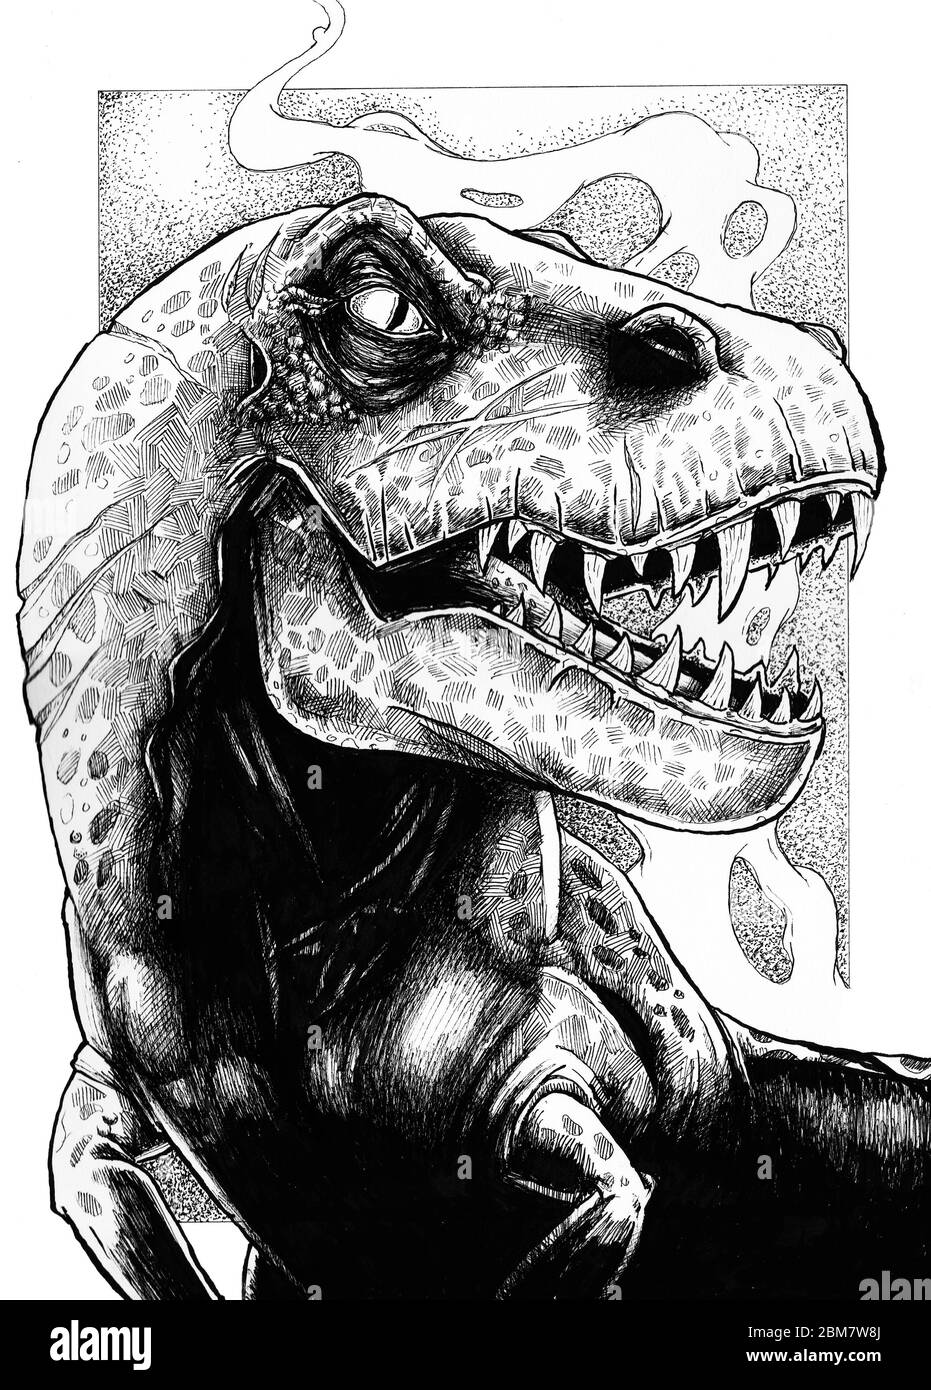 Traditional pen and ink illustration of a close up of a t-rex in black and white Stock Photo